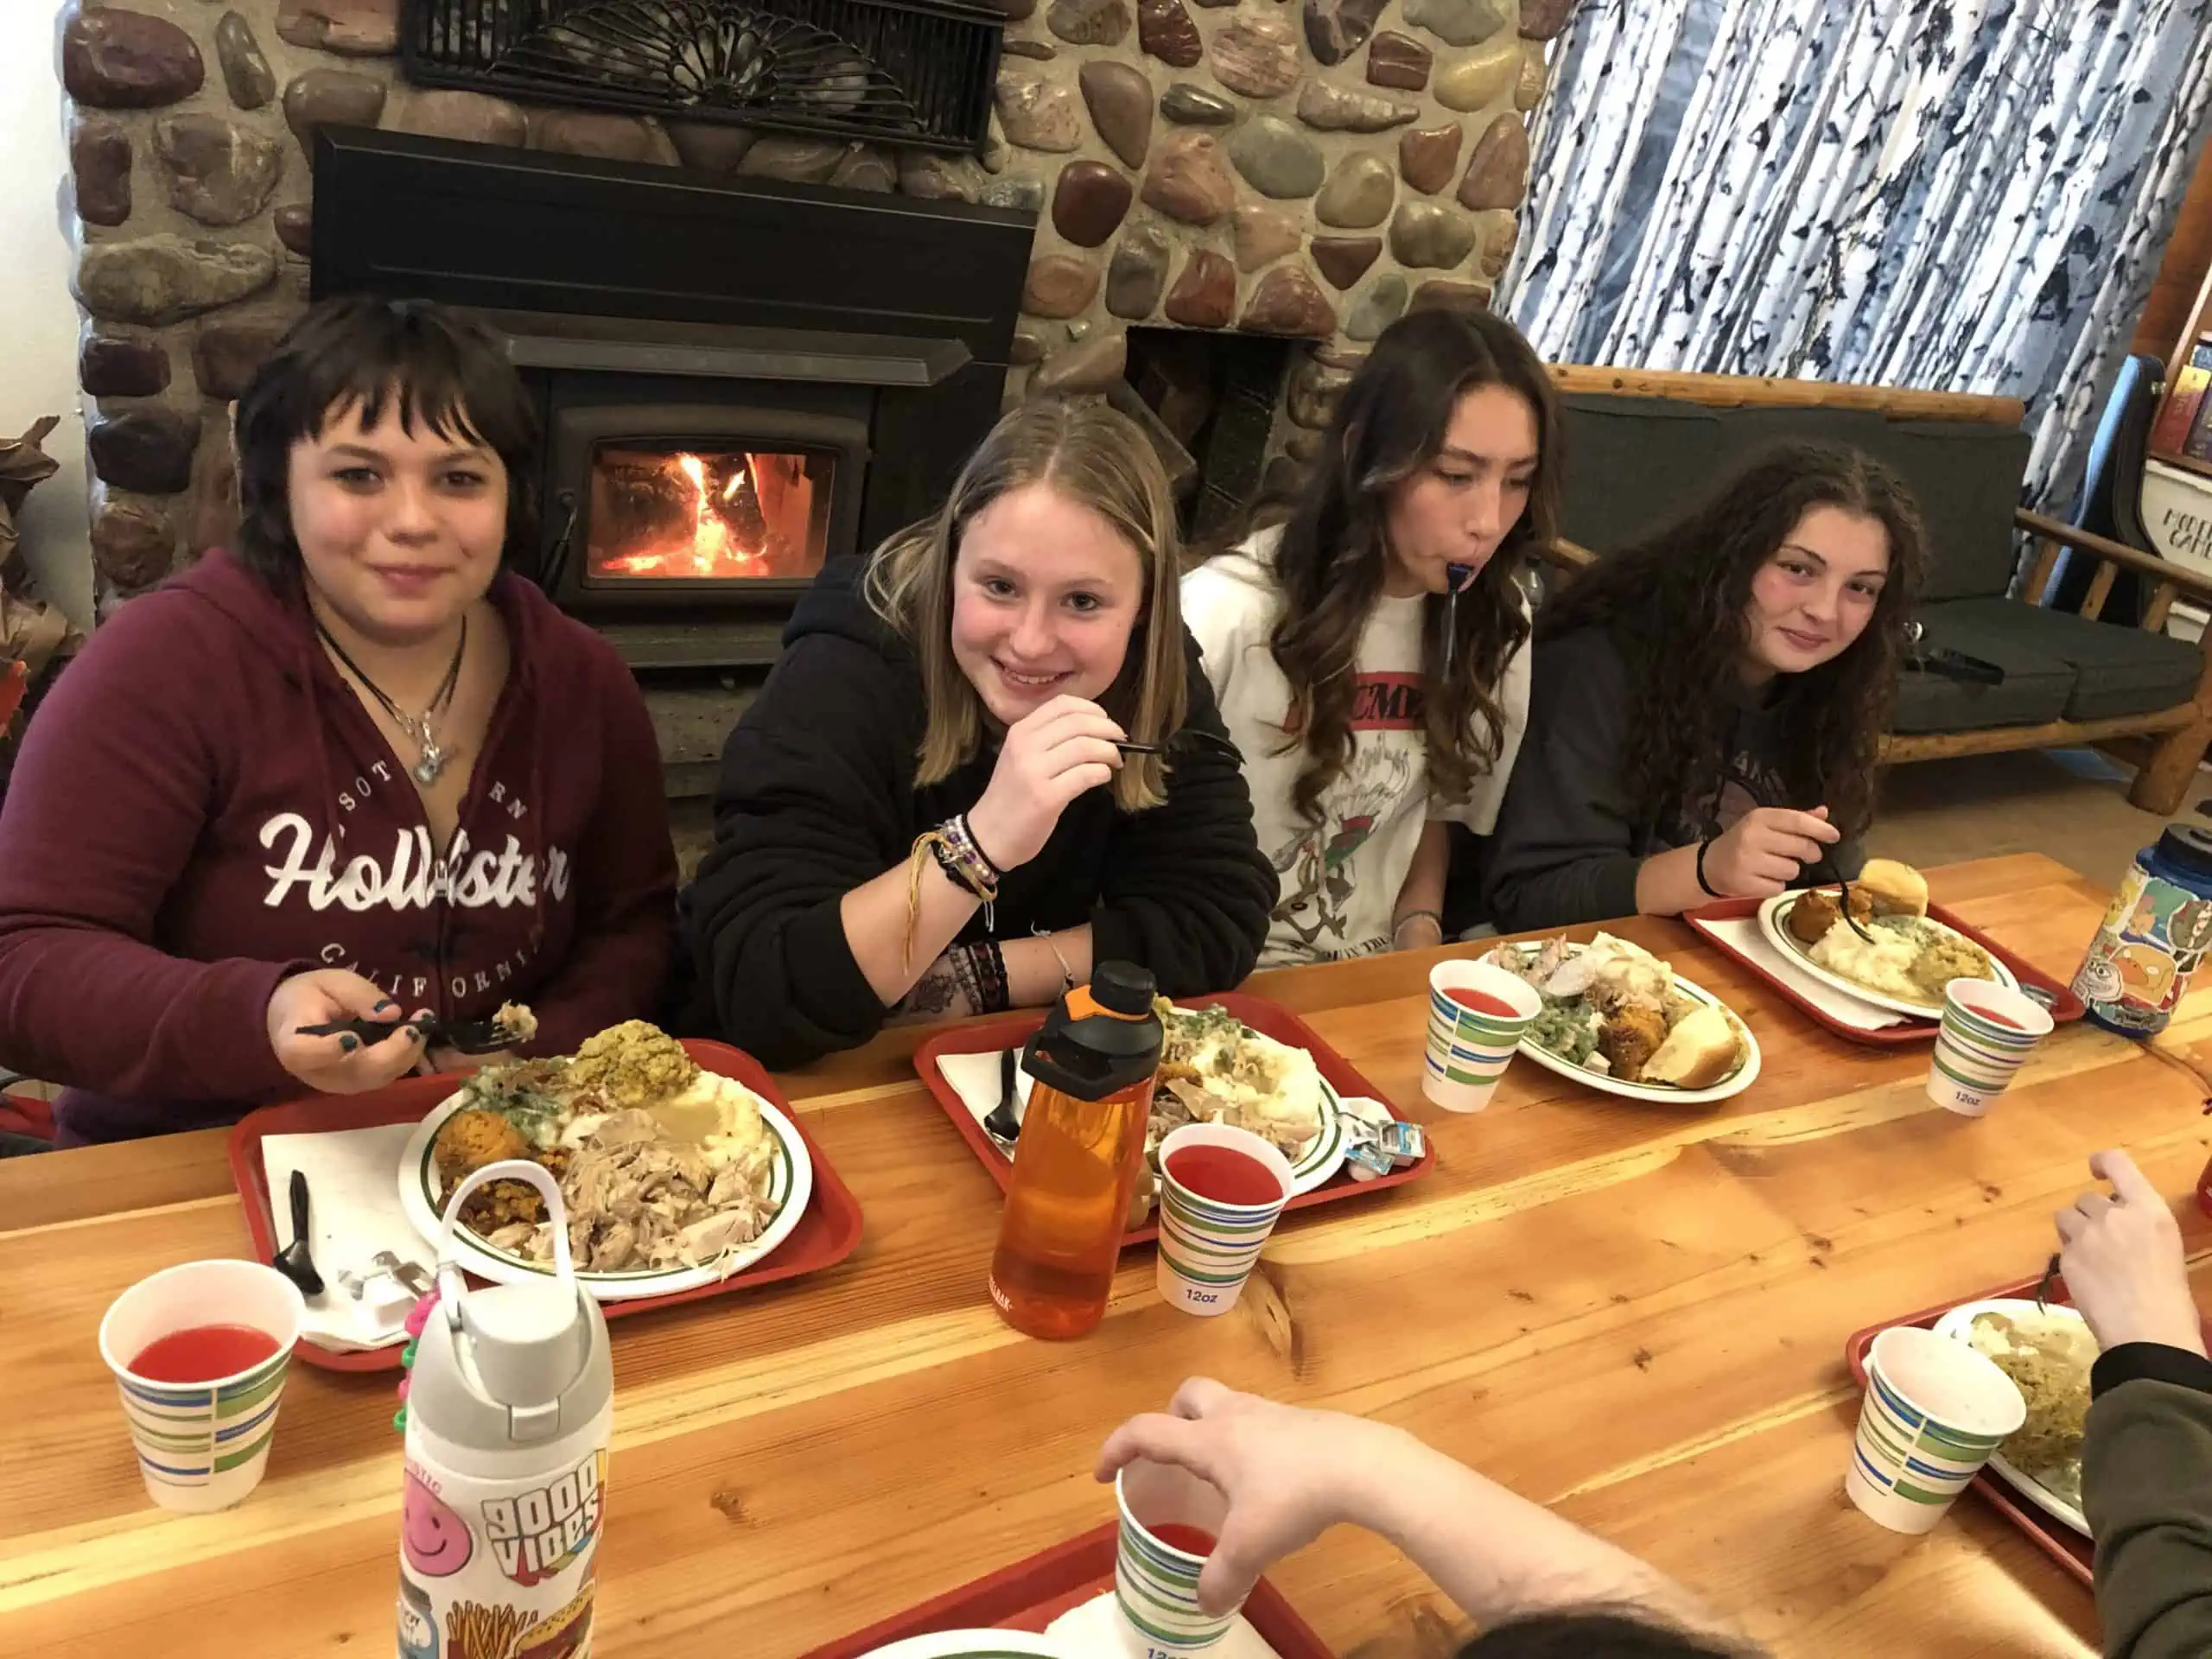 Thanksgiving at Turning Winds, Teenagers enjoying a cozy Thanksgiving meal by a stone fireplace, with a relaxed and joyful holiday atmosphere. Turning Winds, residential treatment center for teens struggling with mental health or behavioral issues.